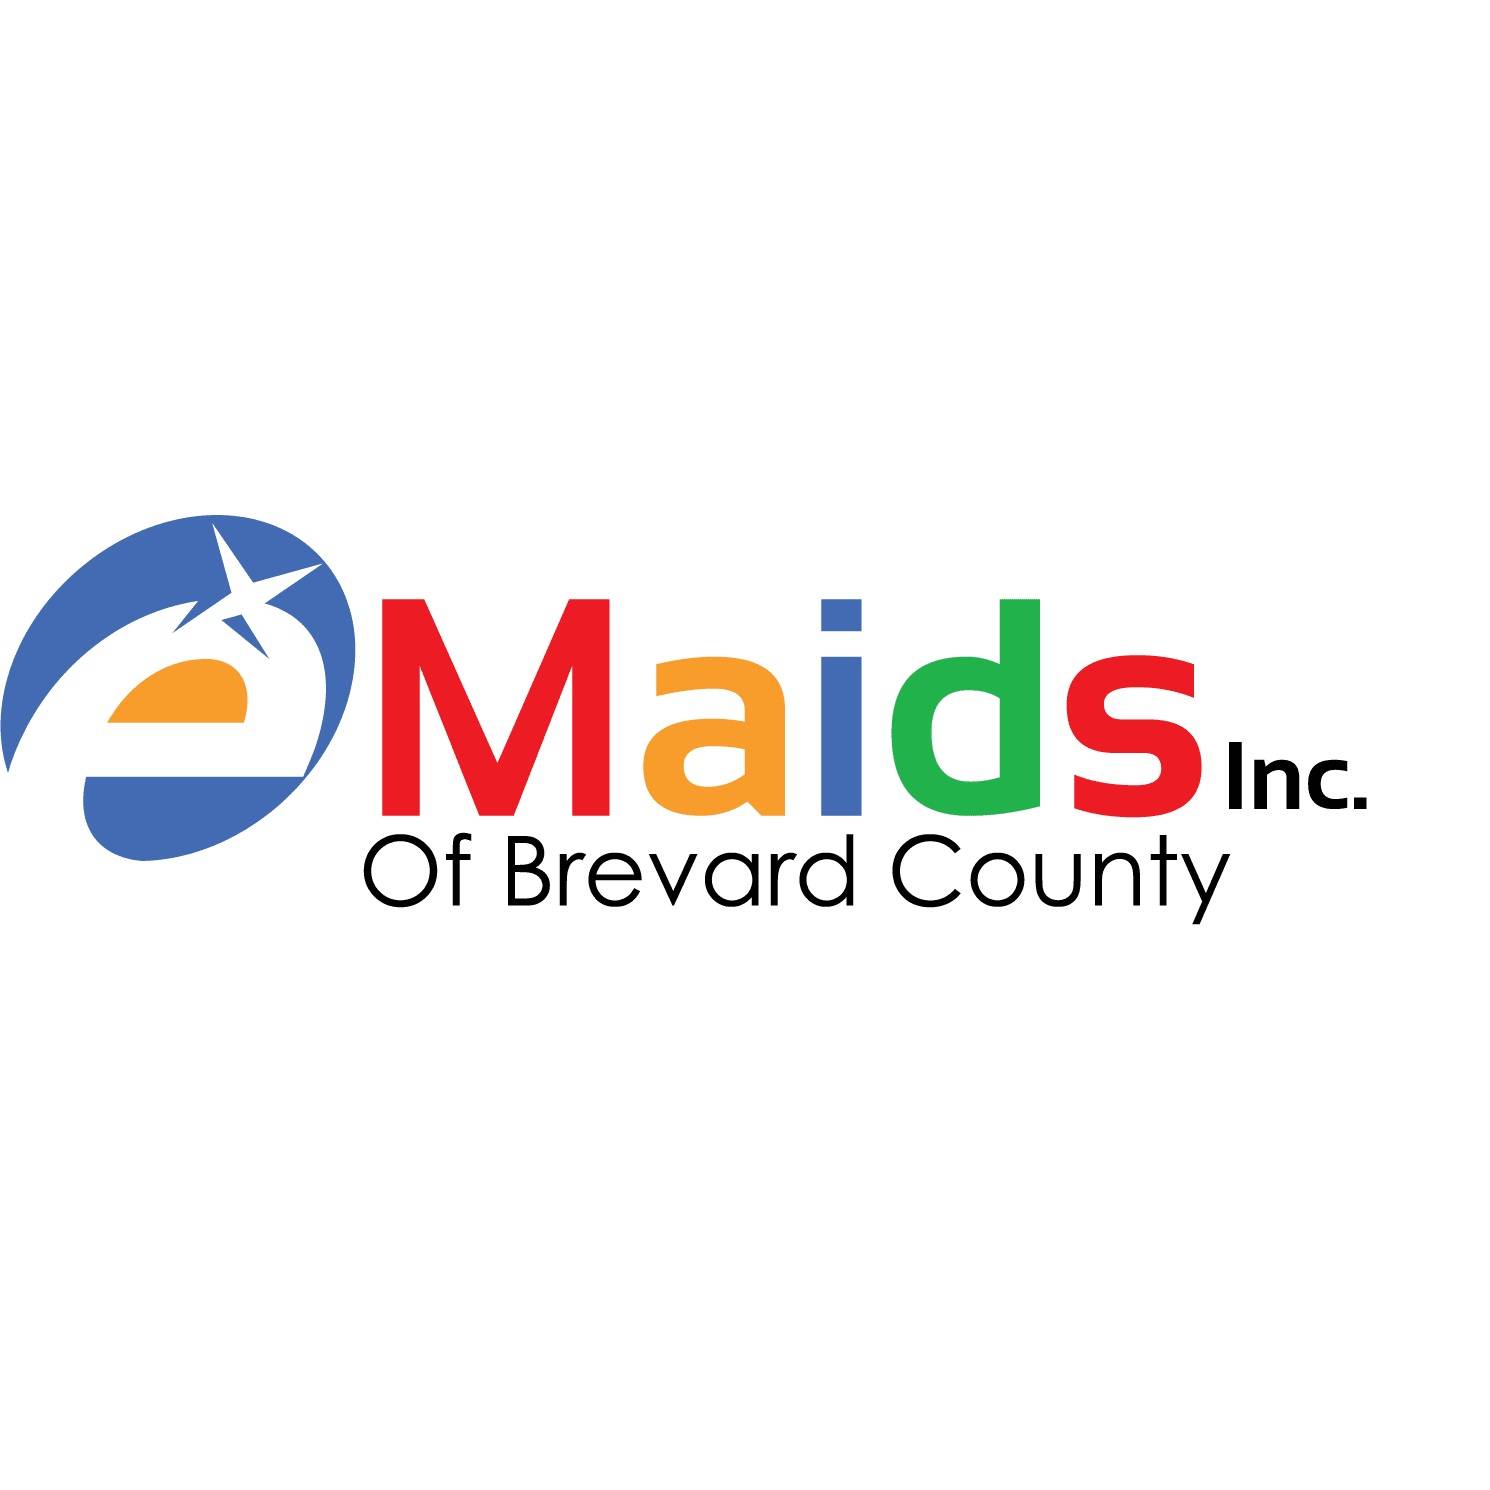 eMaids of Brevard County | 3270 Suntree Blvd Suite 1130, Melbourne, FL 32940, United States | Phone: (321) 677-2122